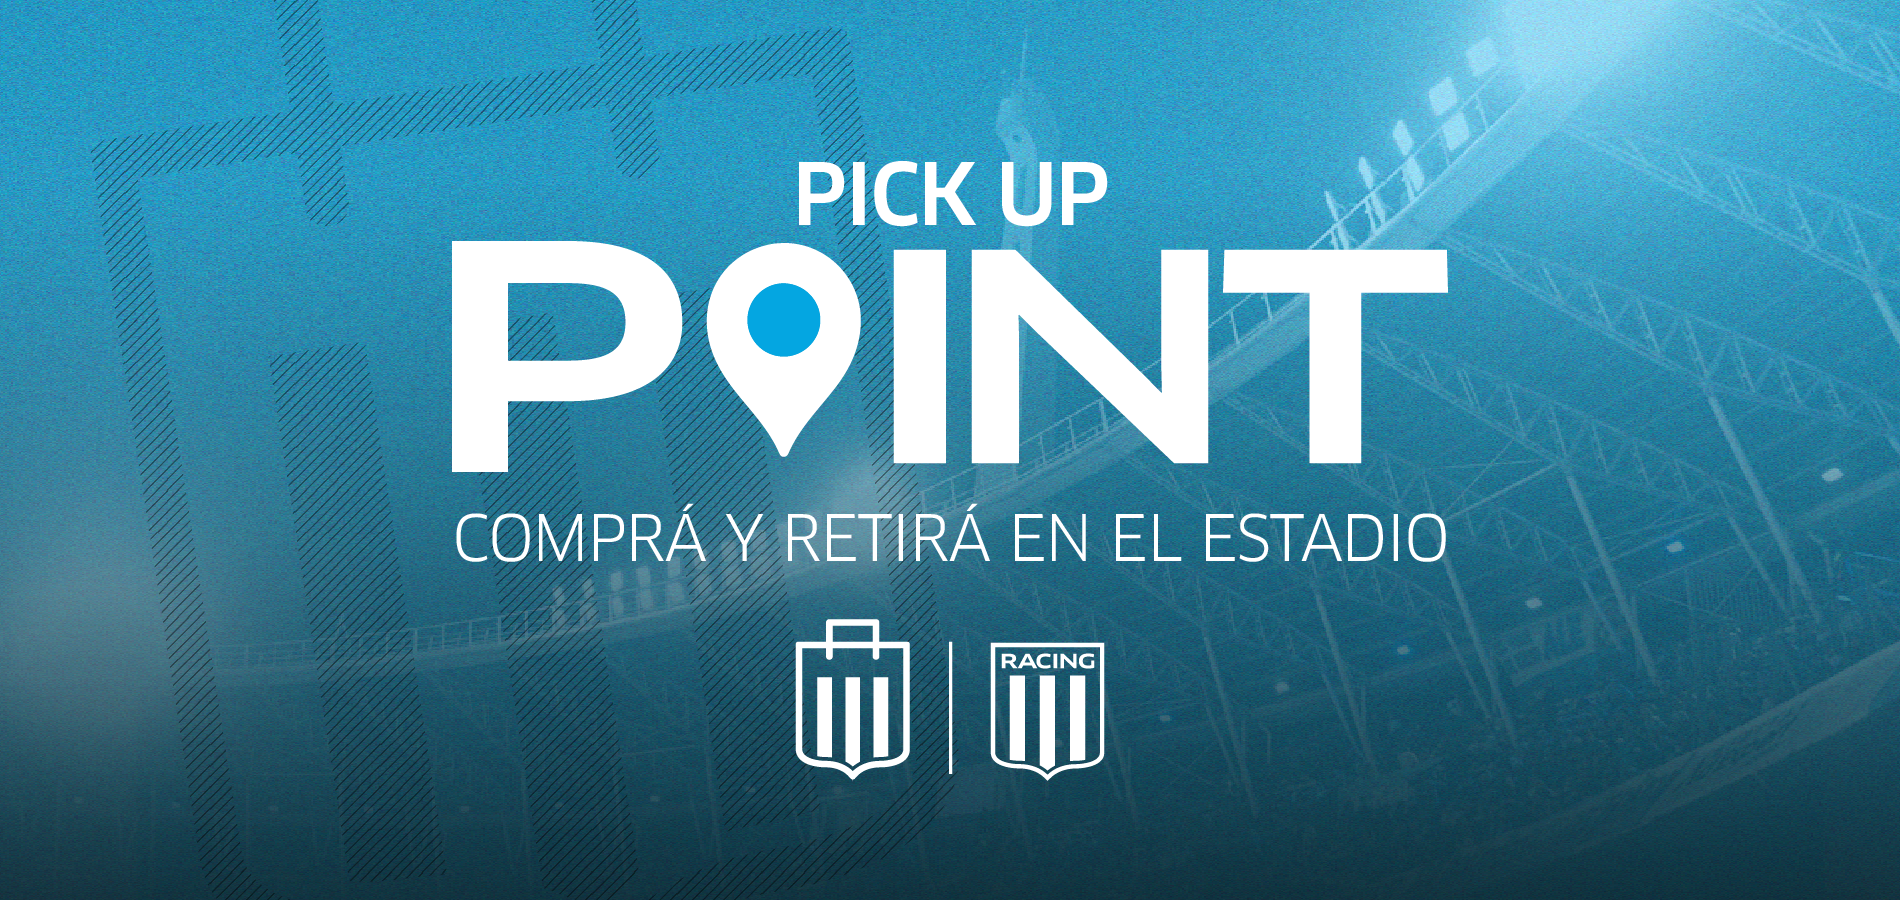 PICK UP POINT